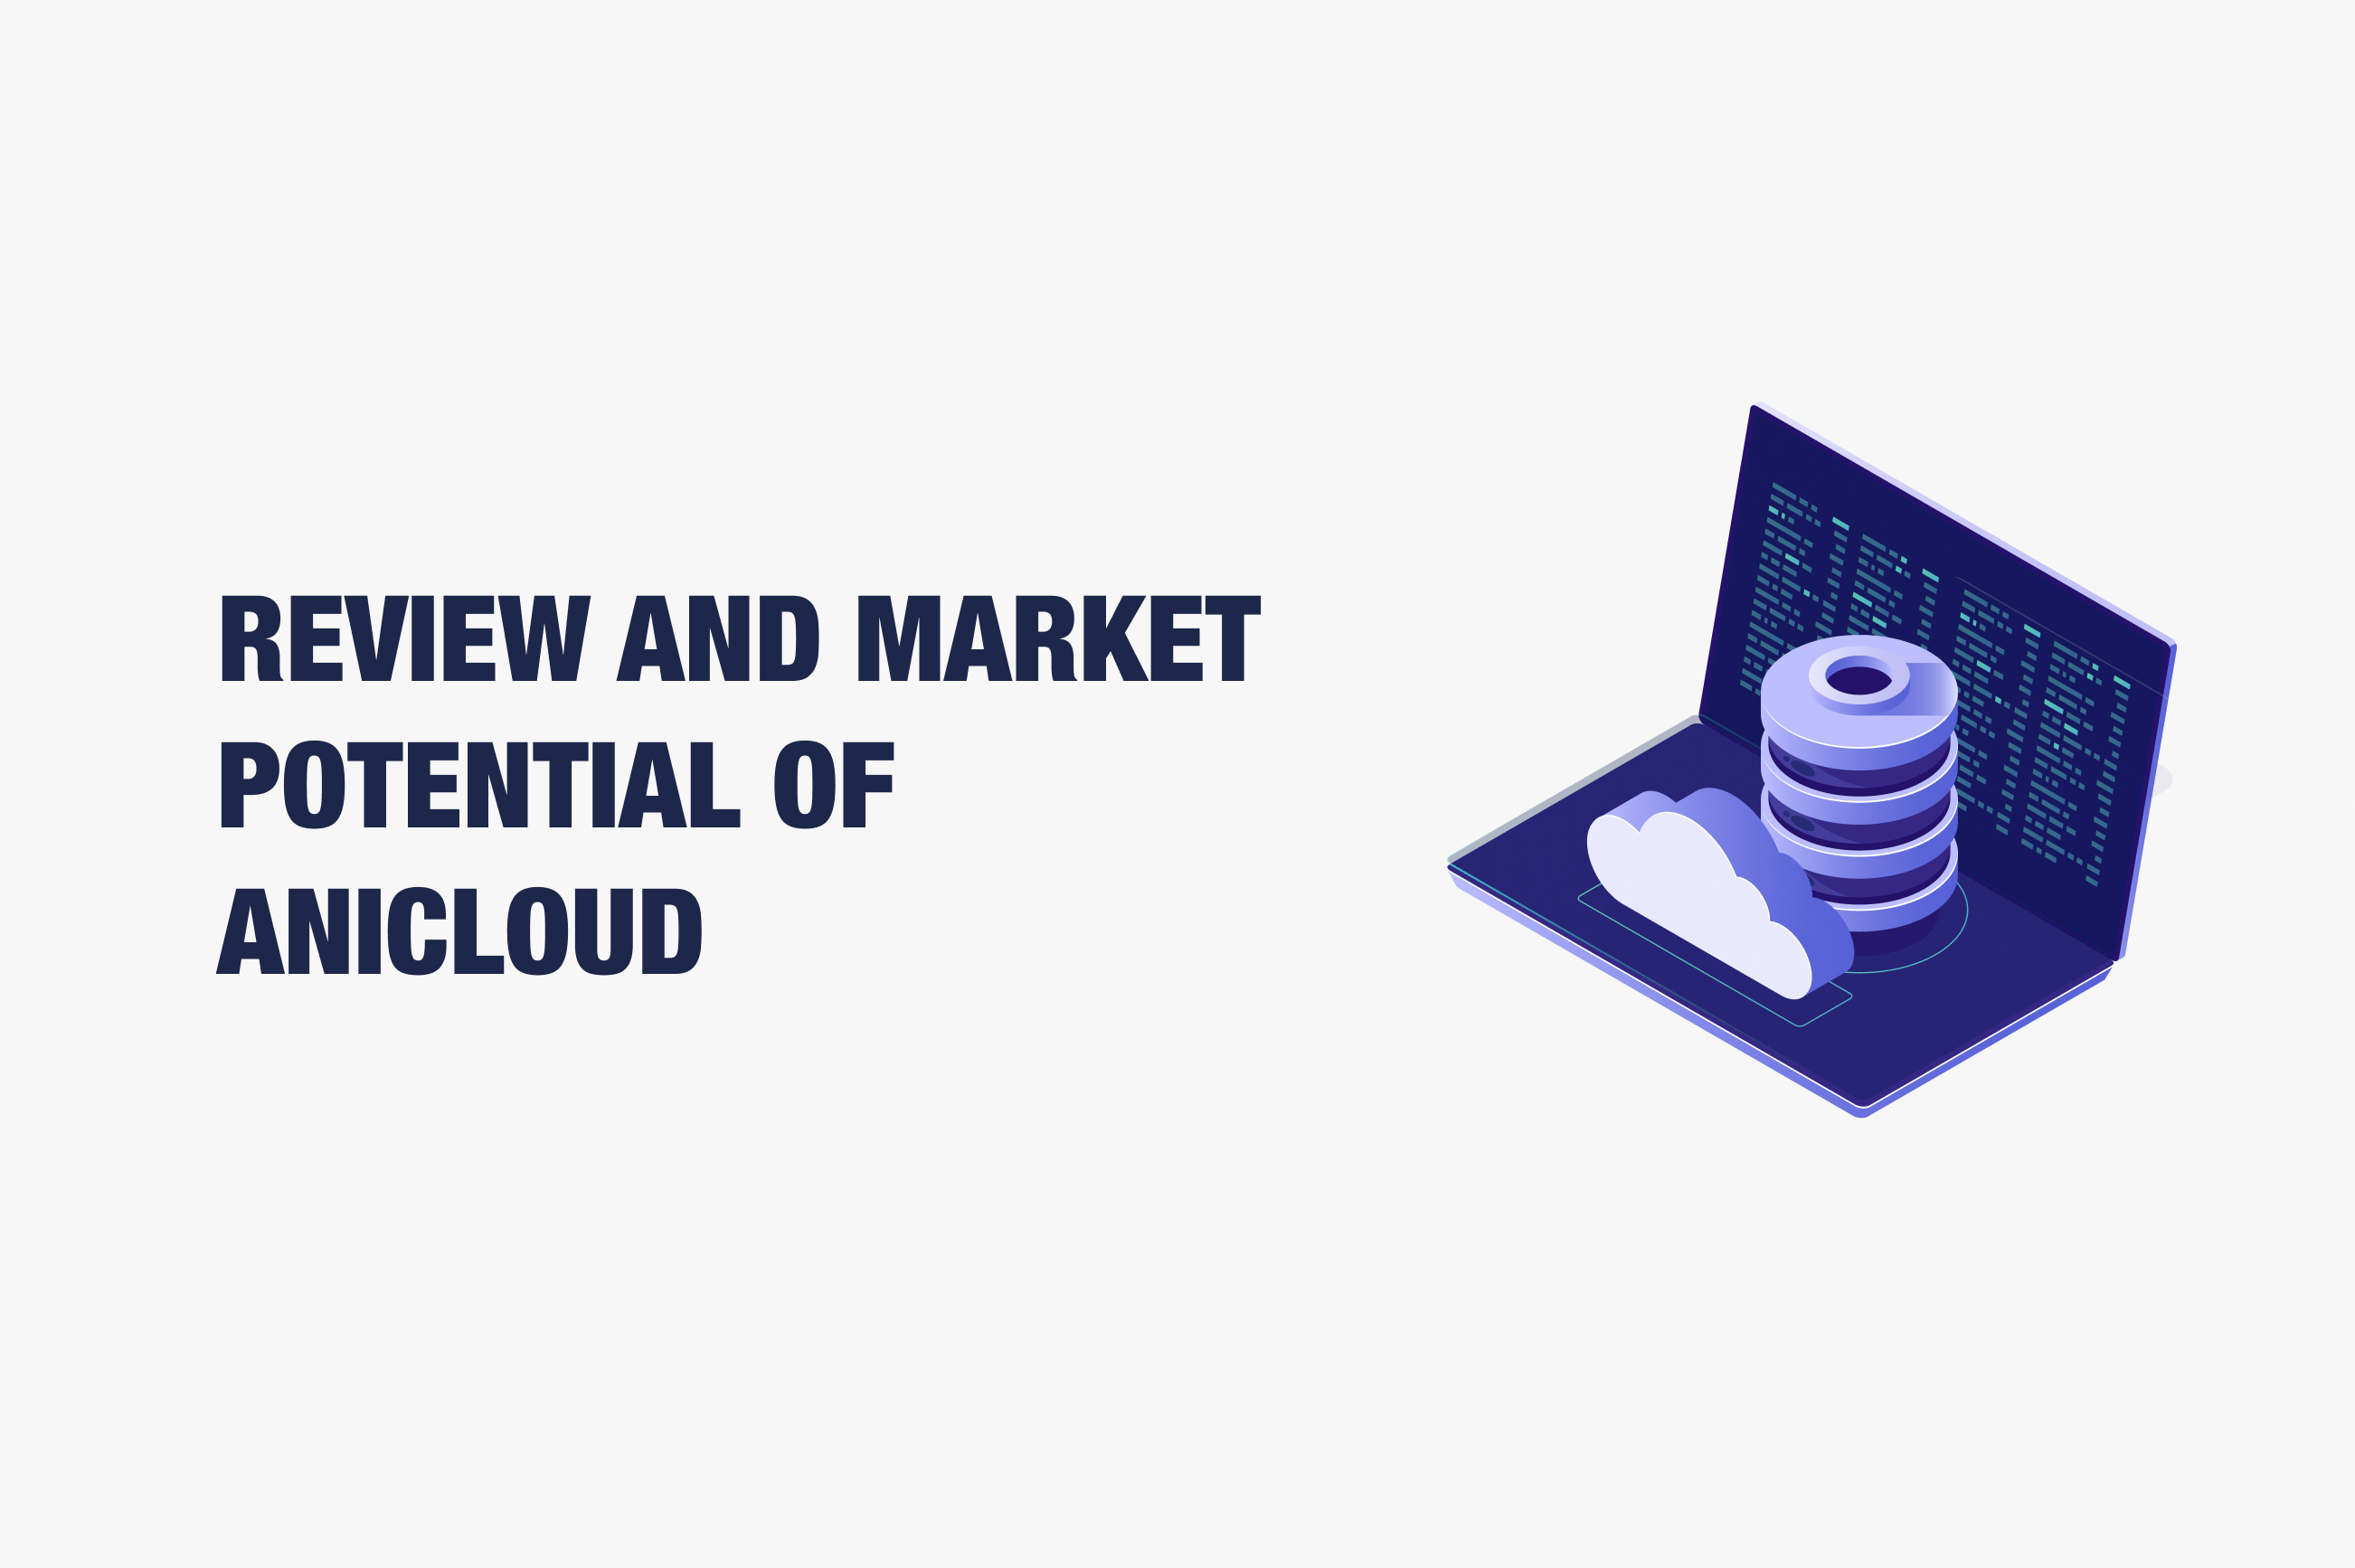 Review and Market Potential of Anicloud